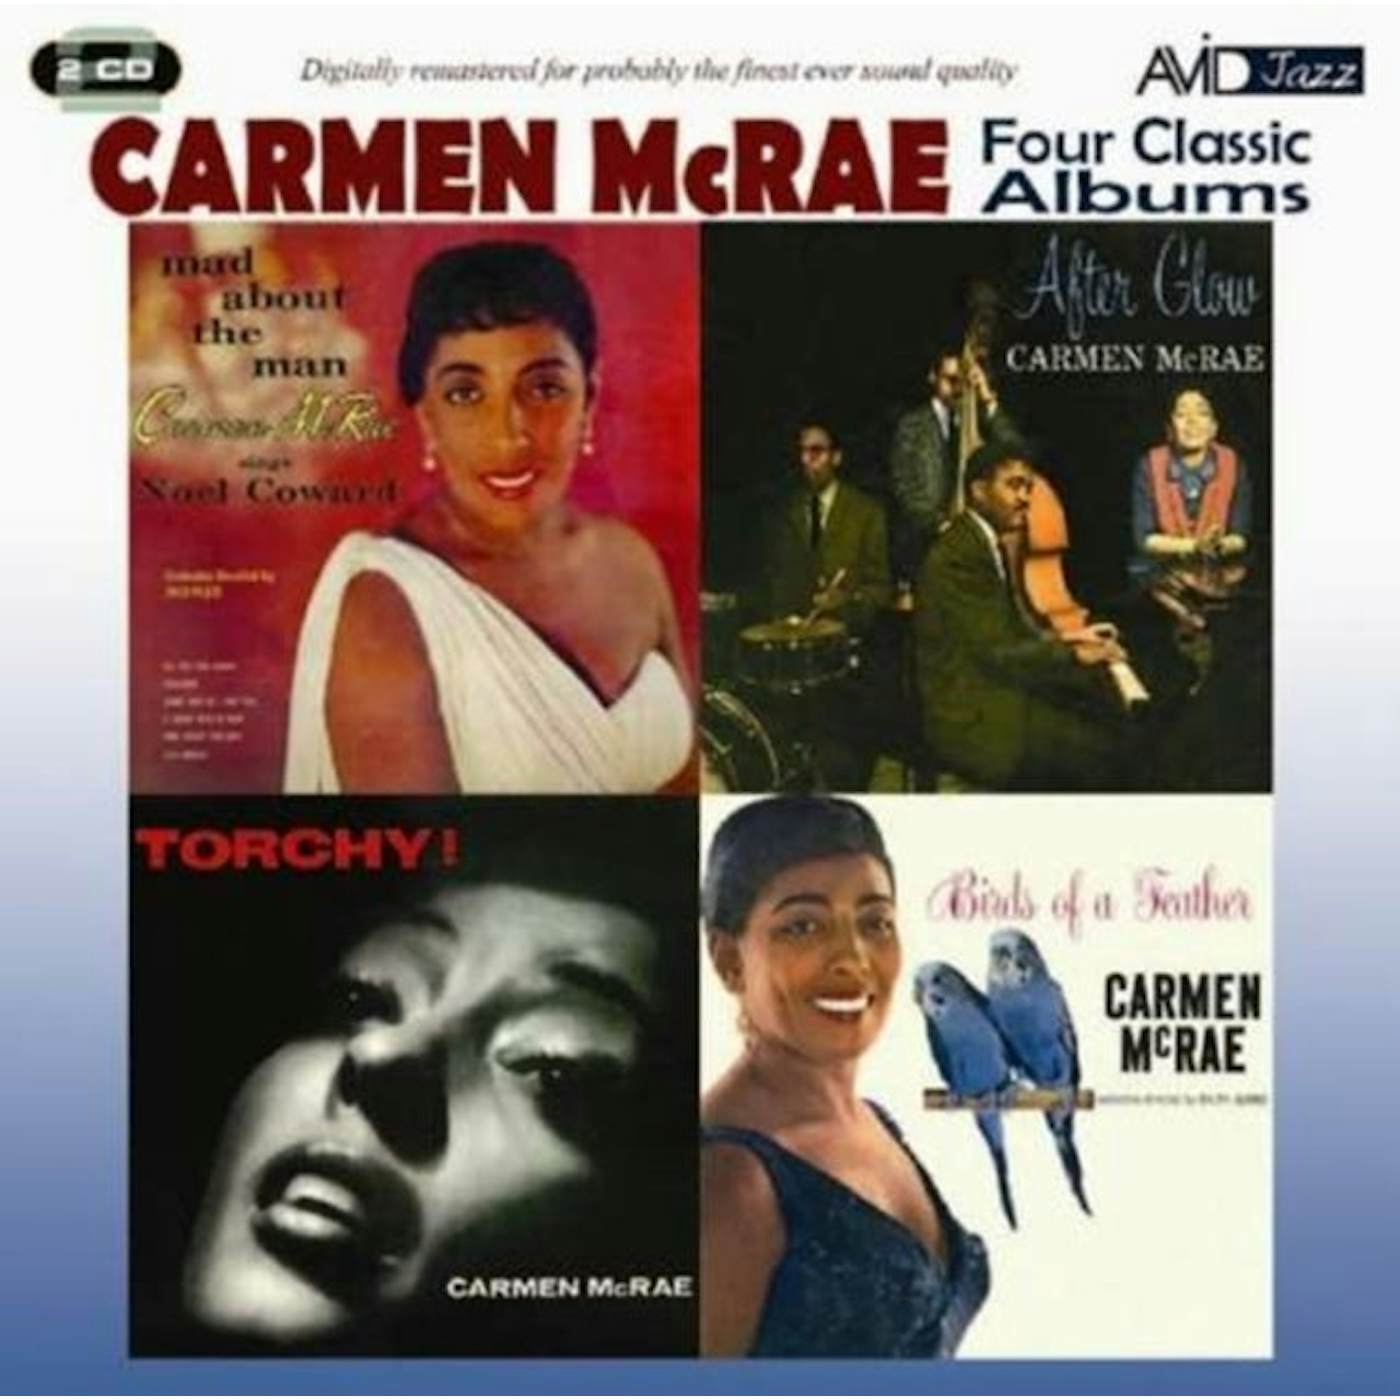 Carmen Mcrae CD - Four Classic Albums (Torchy! / After Glow / Mad About The Man / Birds Of A Feather)